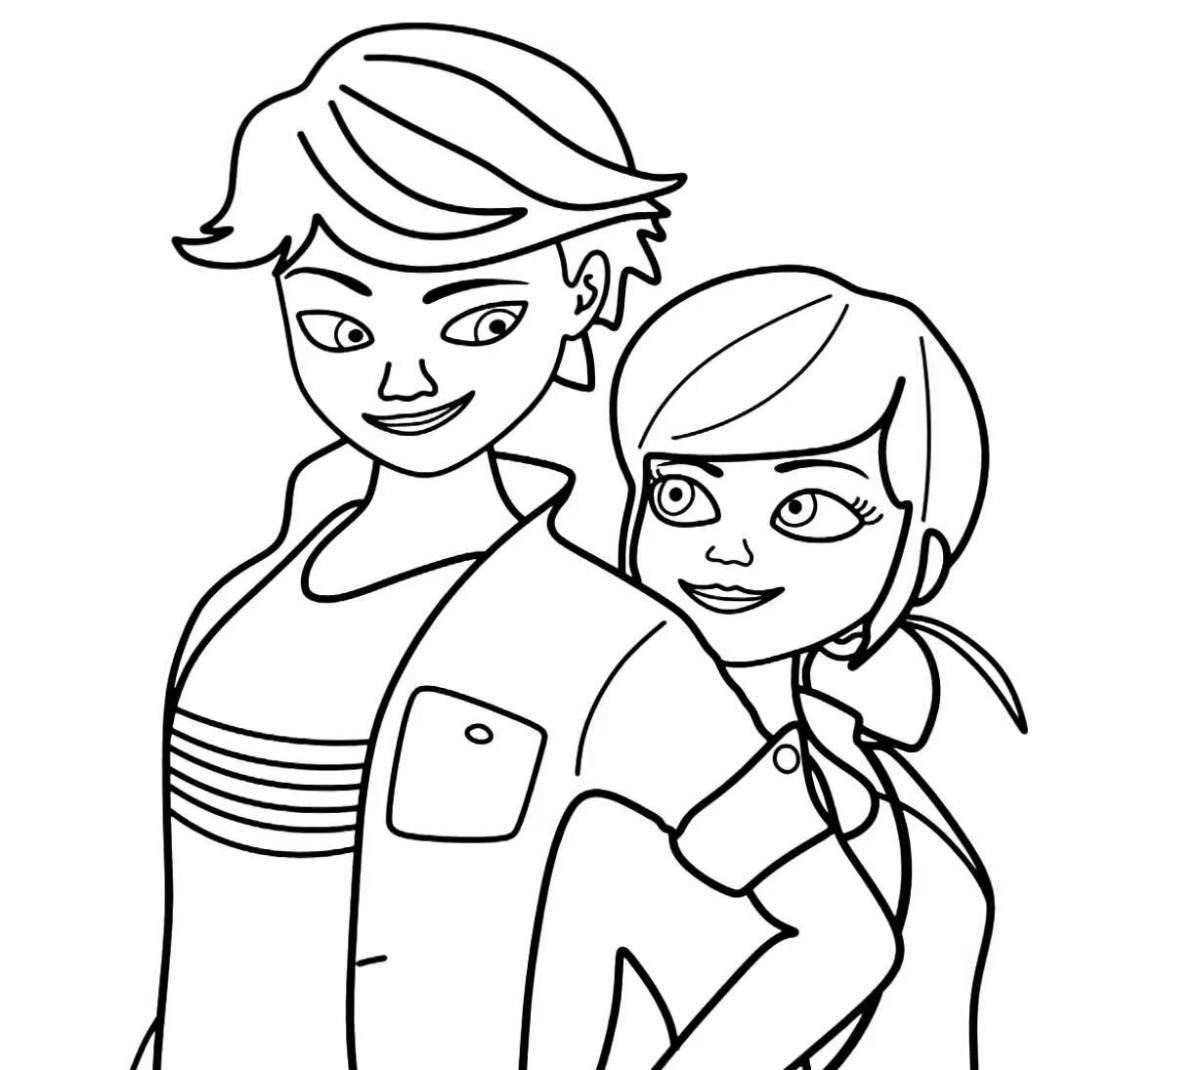 Marinette coloring book for kids